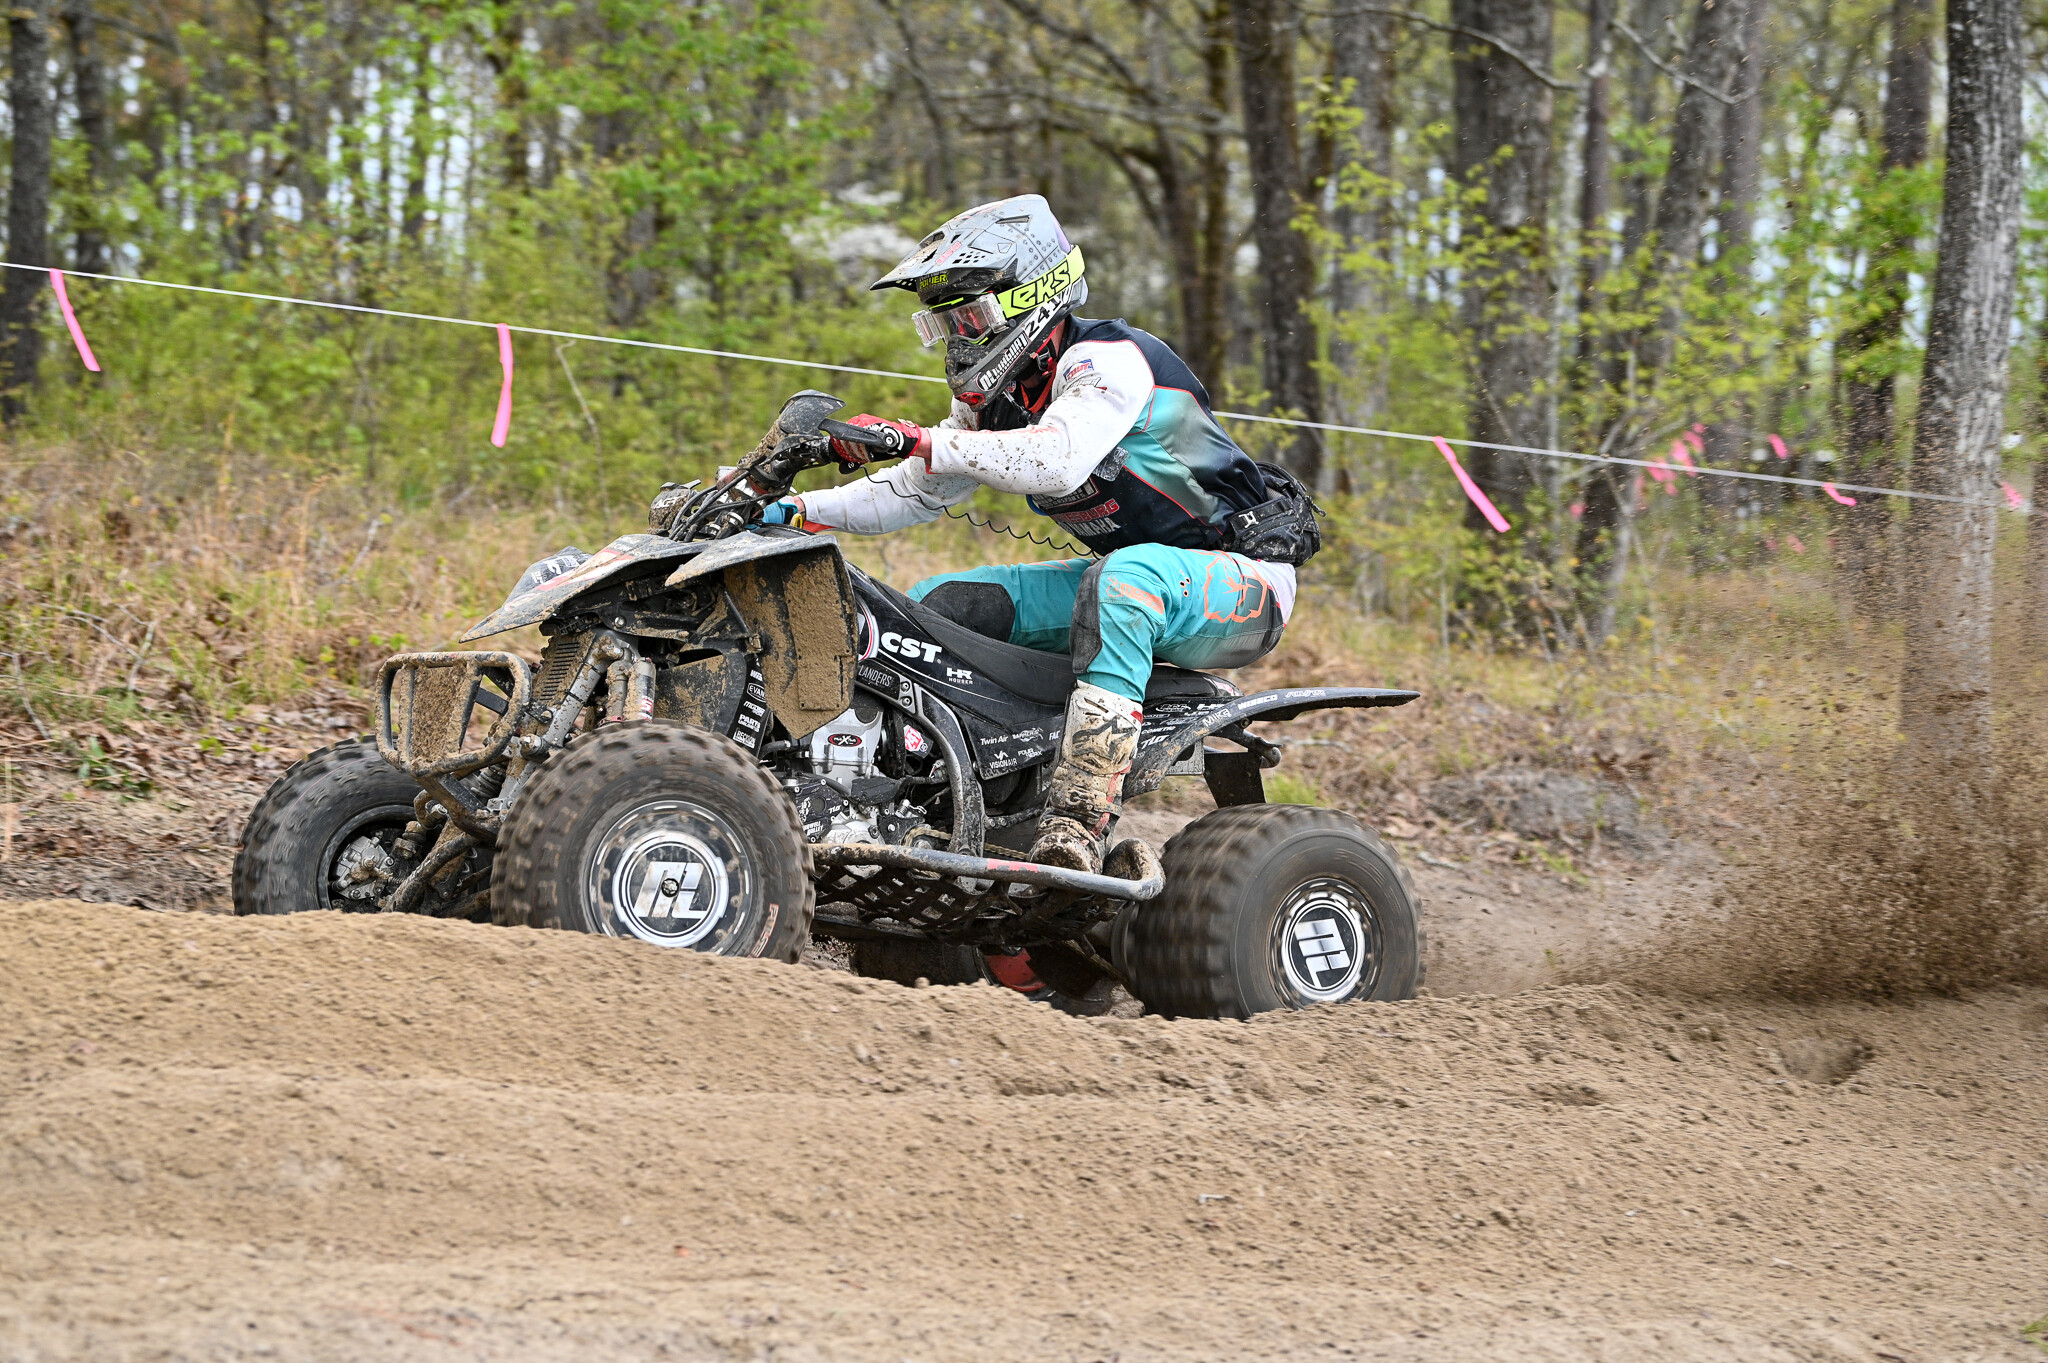 GNCC Racing Heads to the Midwest for Hoosier Race at Ironman Raceway